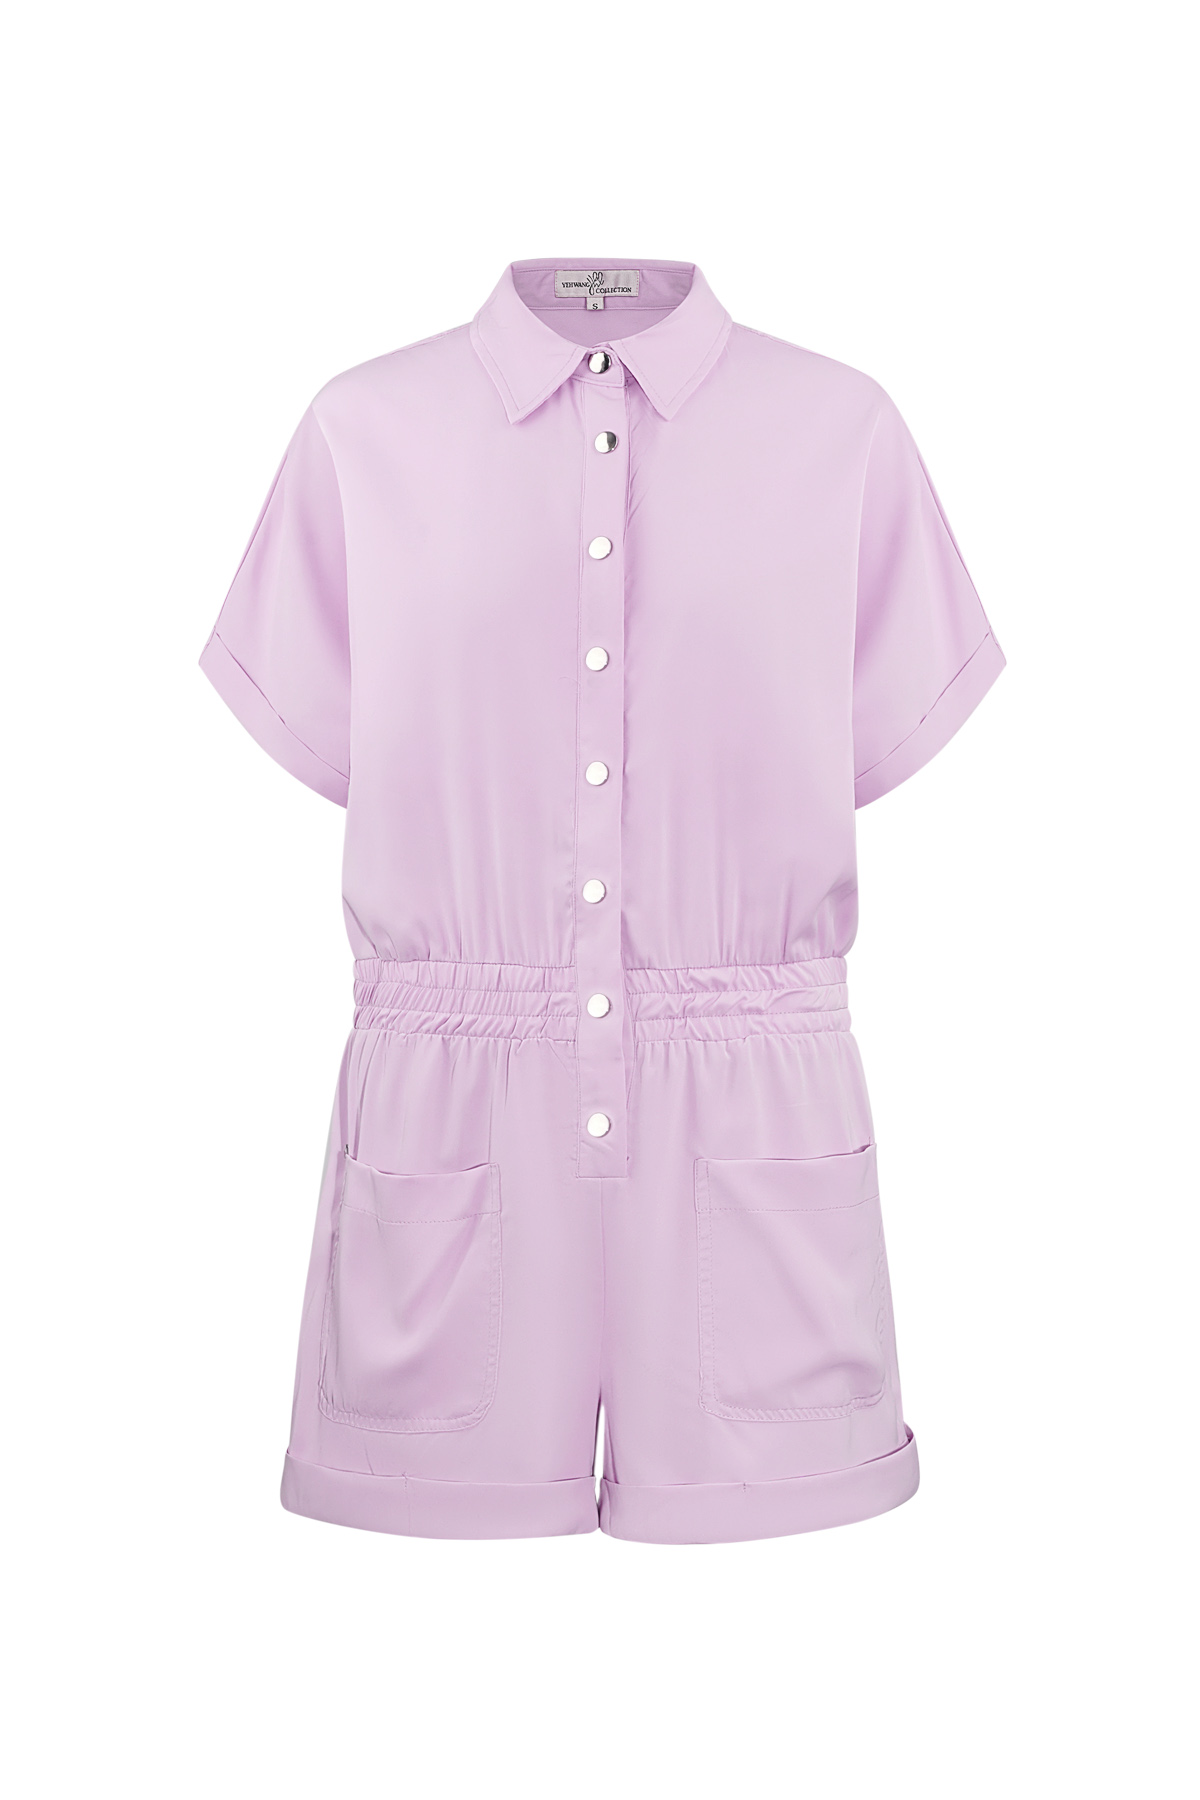 Farbenfroher Playsuit - lila h5 